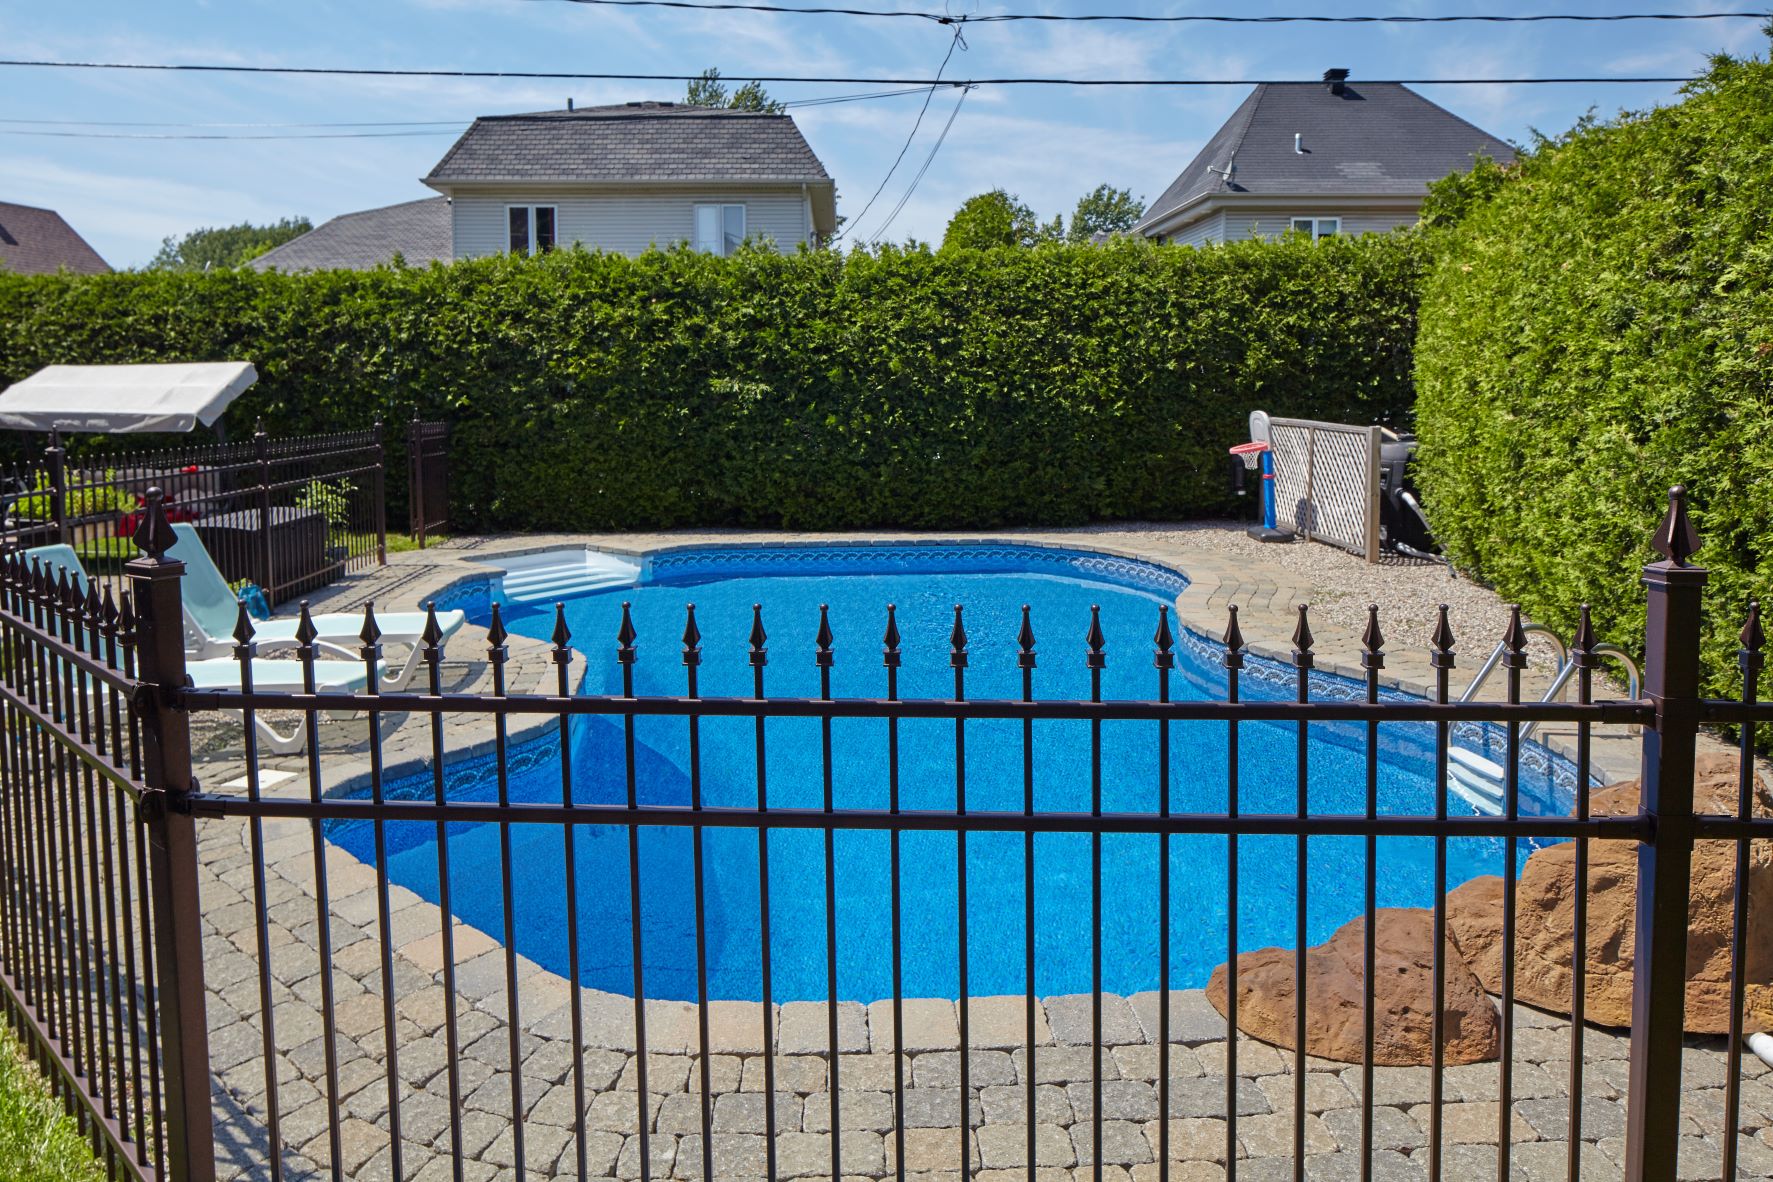 Safety Requirements for Pool Fencing